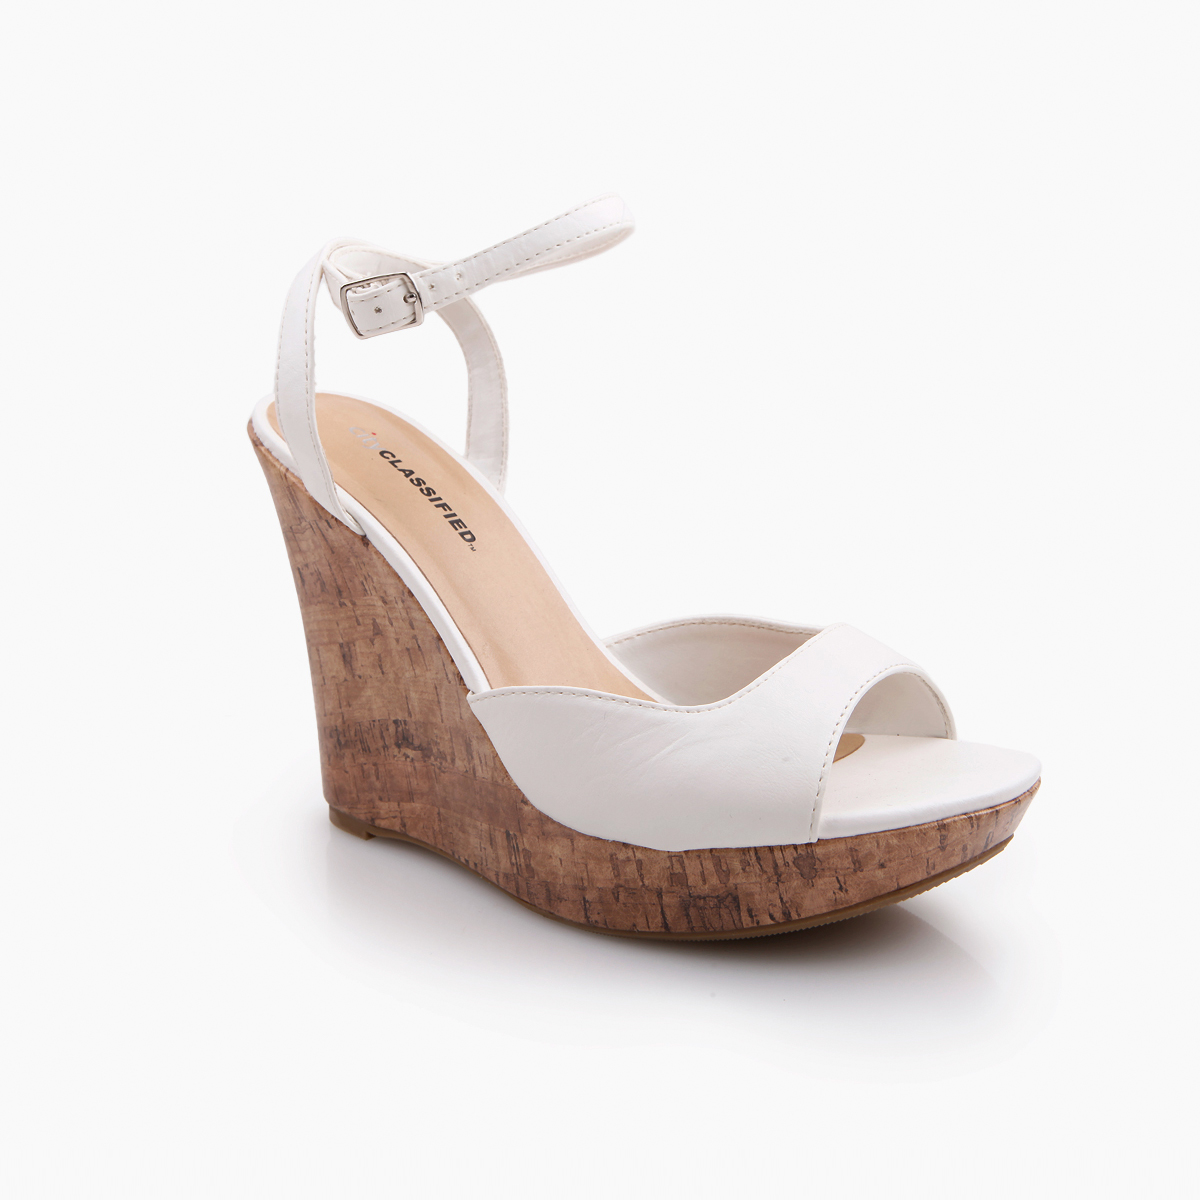 All American Cork Wedges by City Classified